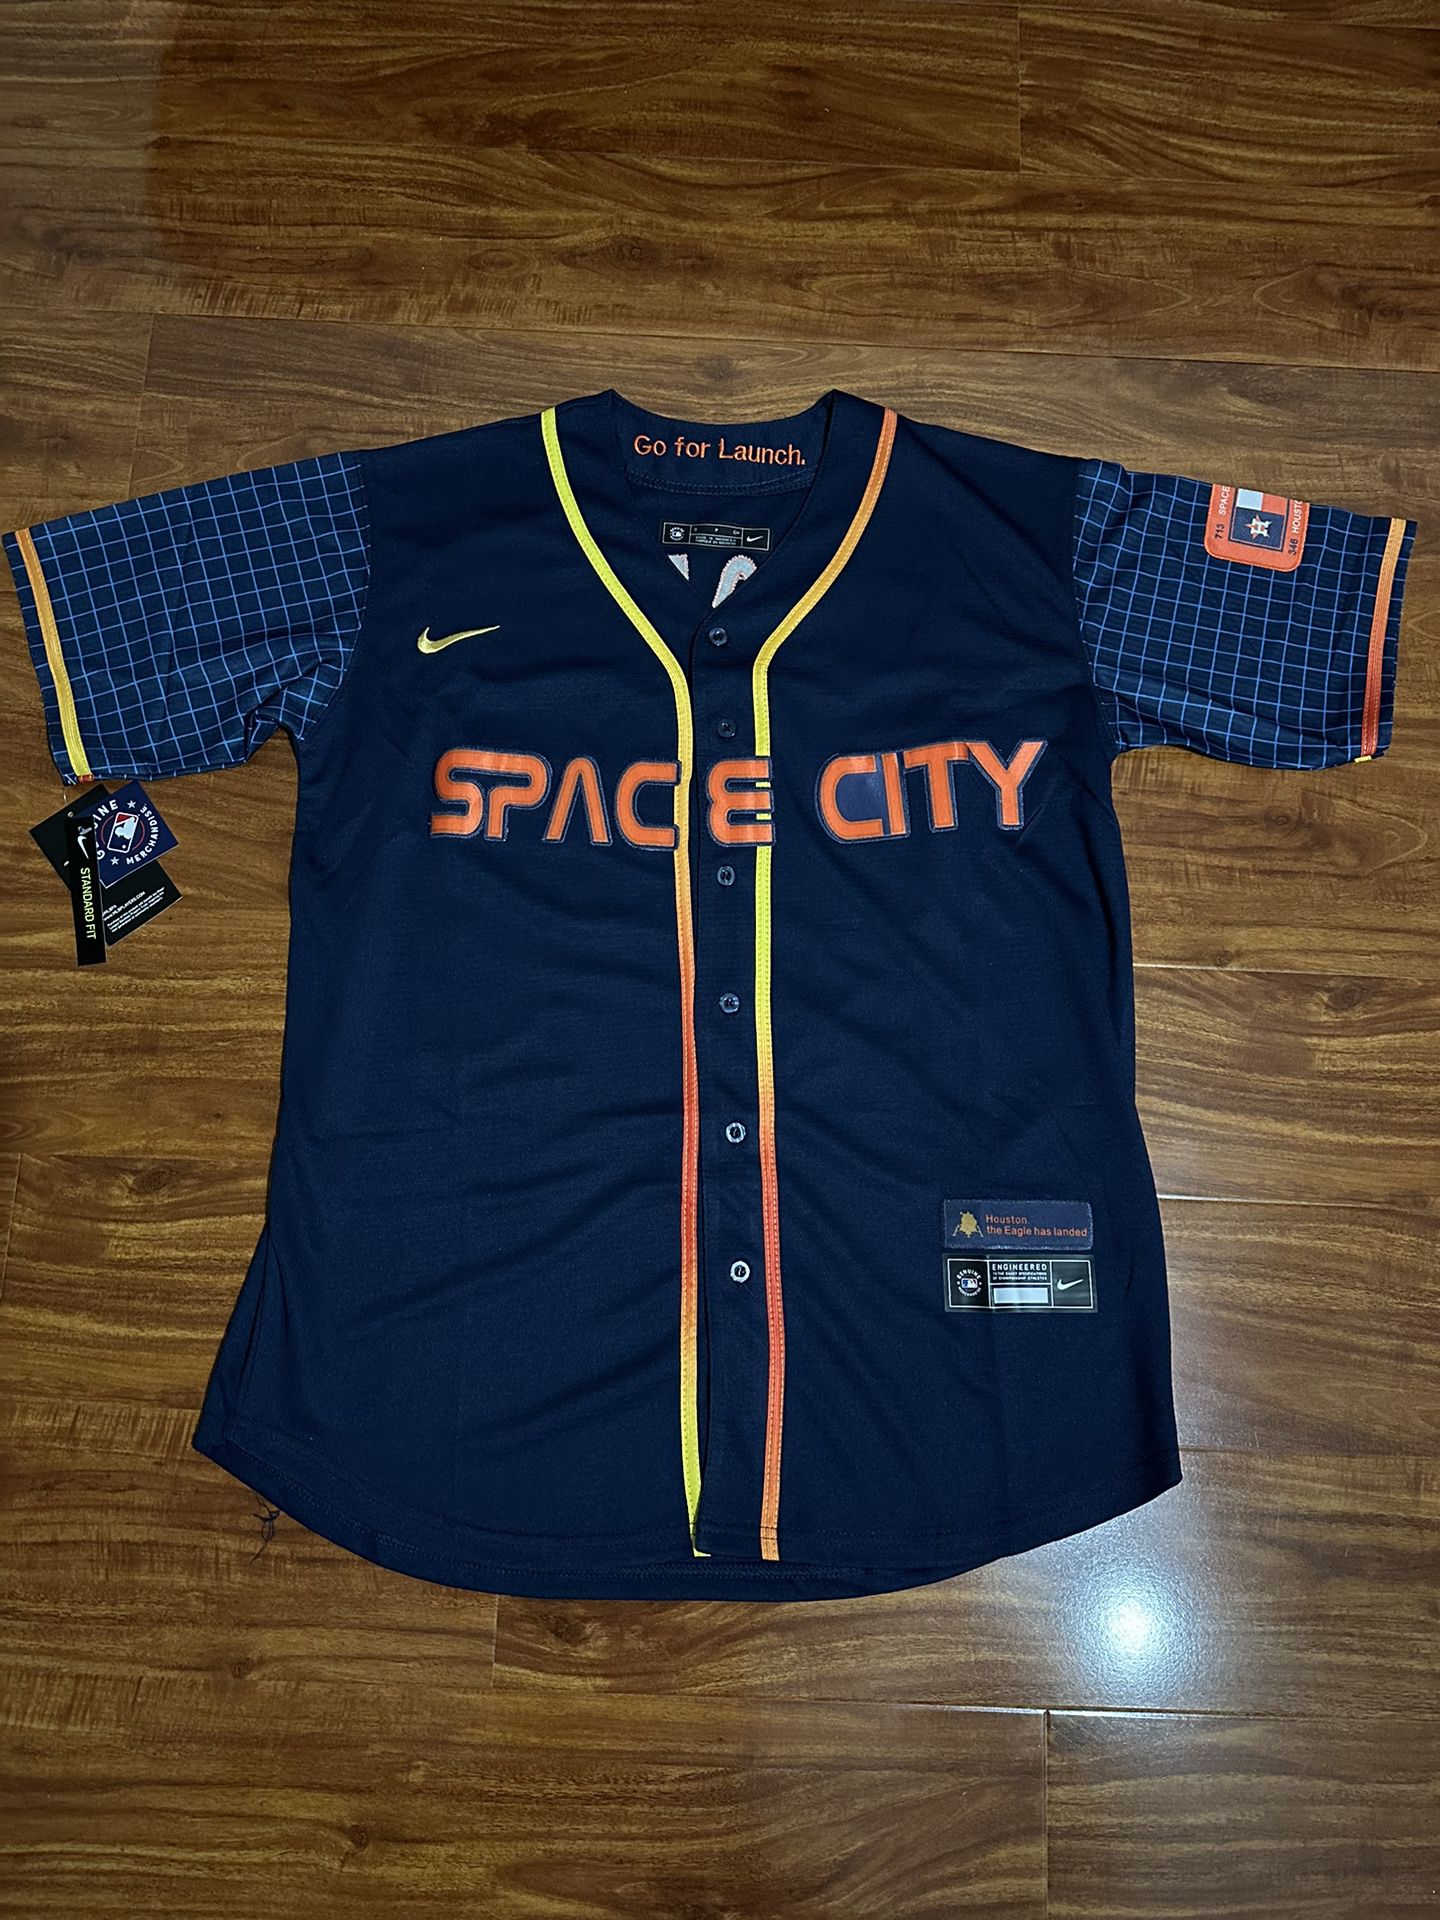 HOUSTON ASTROS COLUMBIA FISHING SHIRT for Sale in Friendswood, TX - OfferUp  